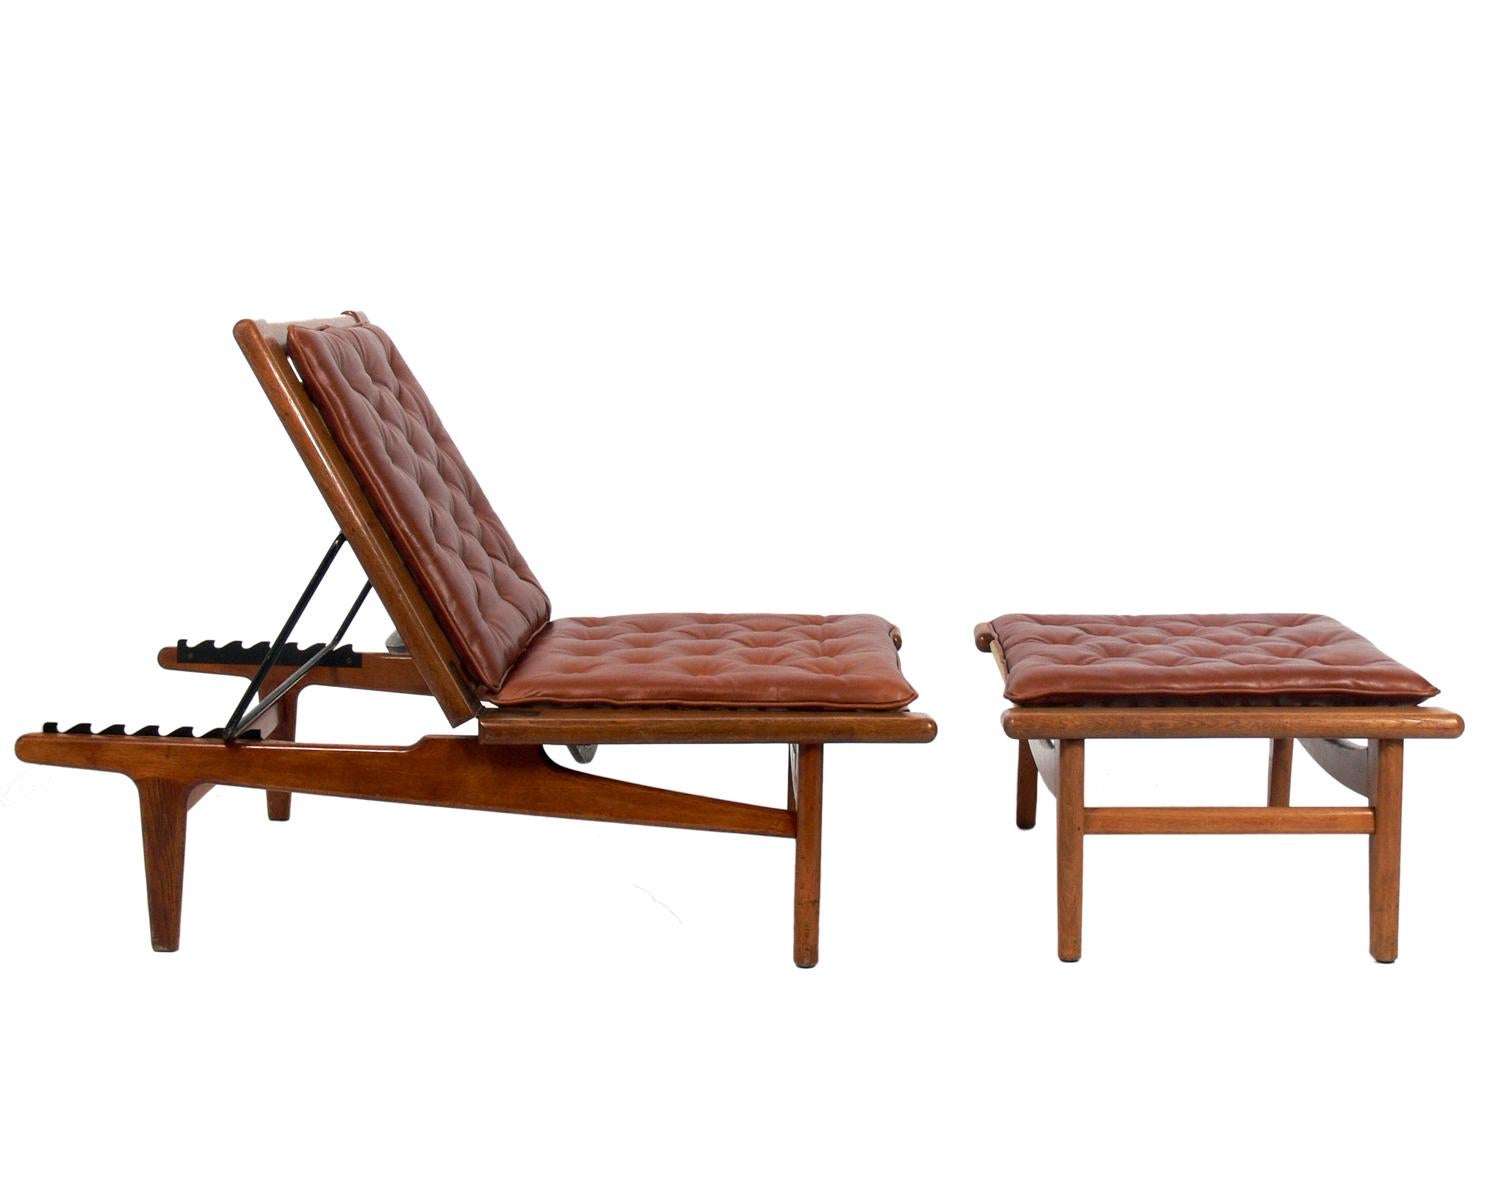 Danish modern chaise lounge and ottoman, designed by Hans Wegner for GETAMA, Denmark, circa 1950s. Leather cushions reupholstered in a buttery soft cognac color leather. Signed with branded manufacturer’s mark to underside of each element: [GETAMA